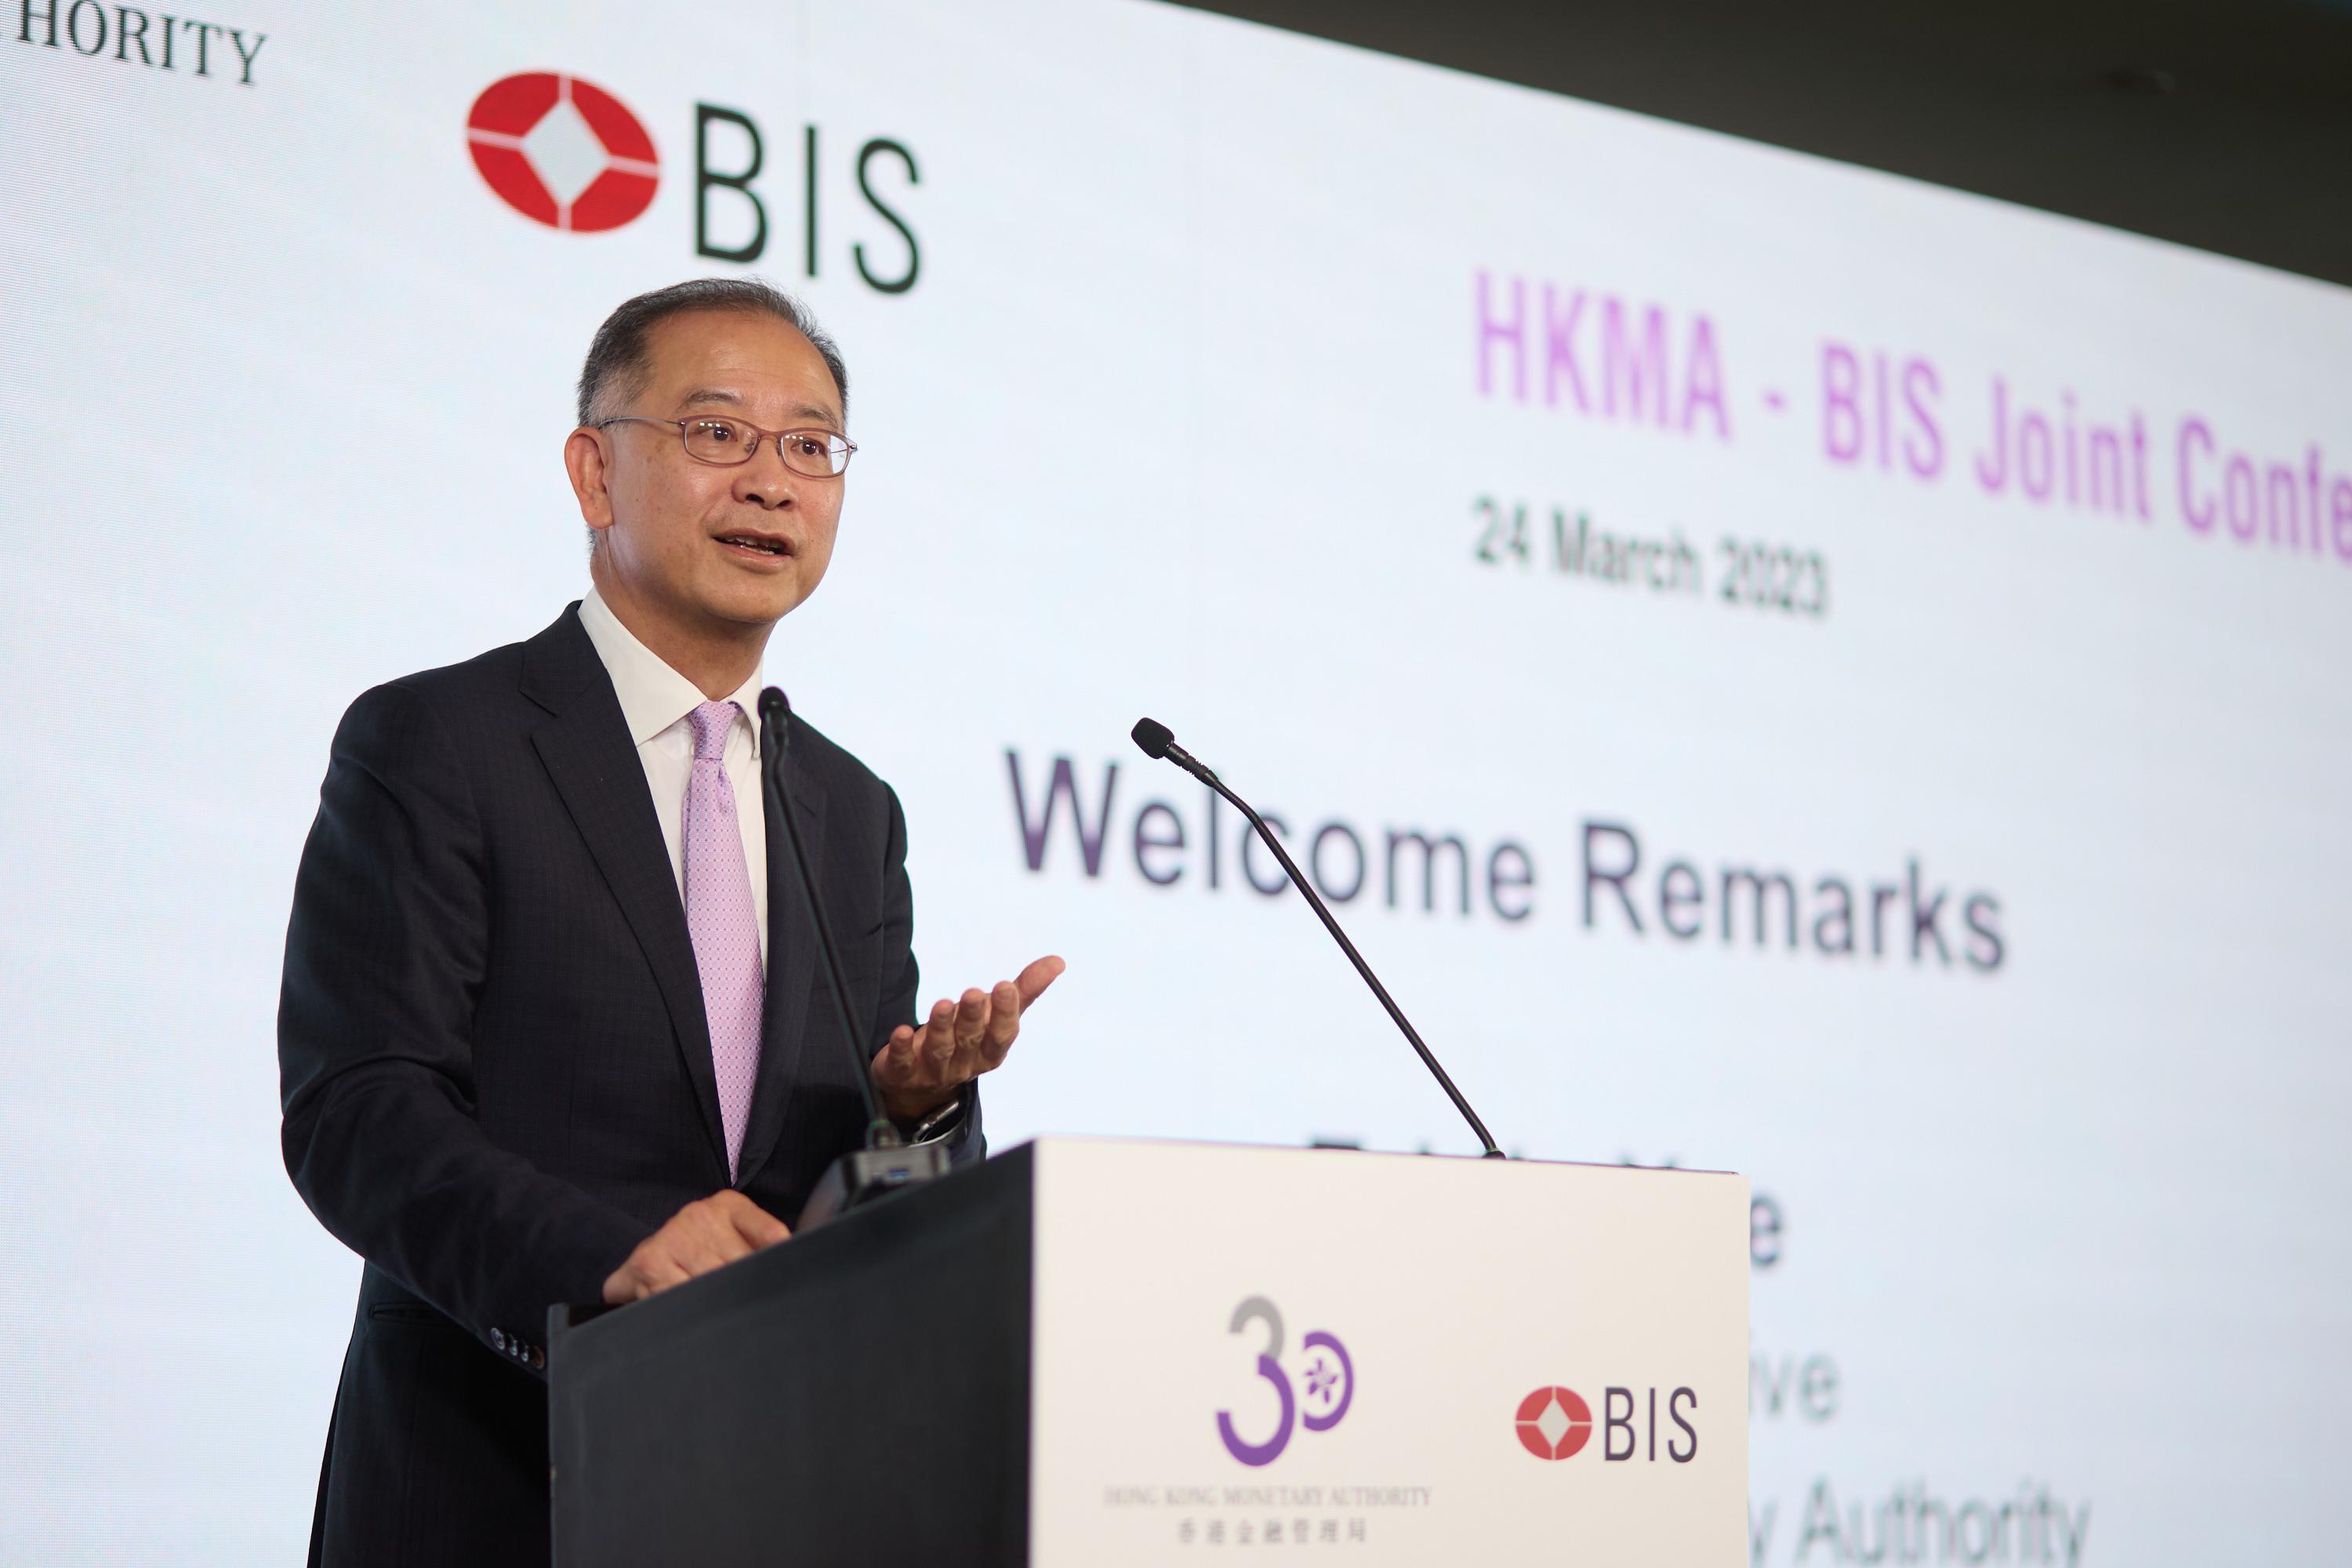 An international financial regulatory conference jointly co-organised by the Hong Kong Monetary Authority (HKMA) and the Bank for International Settlements (BIS) was successfully concluded today (March 24) in Hong Kong. Photo shows the Chief Executive of the HKMA, Mr Eddie Yue, delivers welcome remarks at the HKMA-BIS Joint Conference.